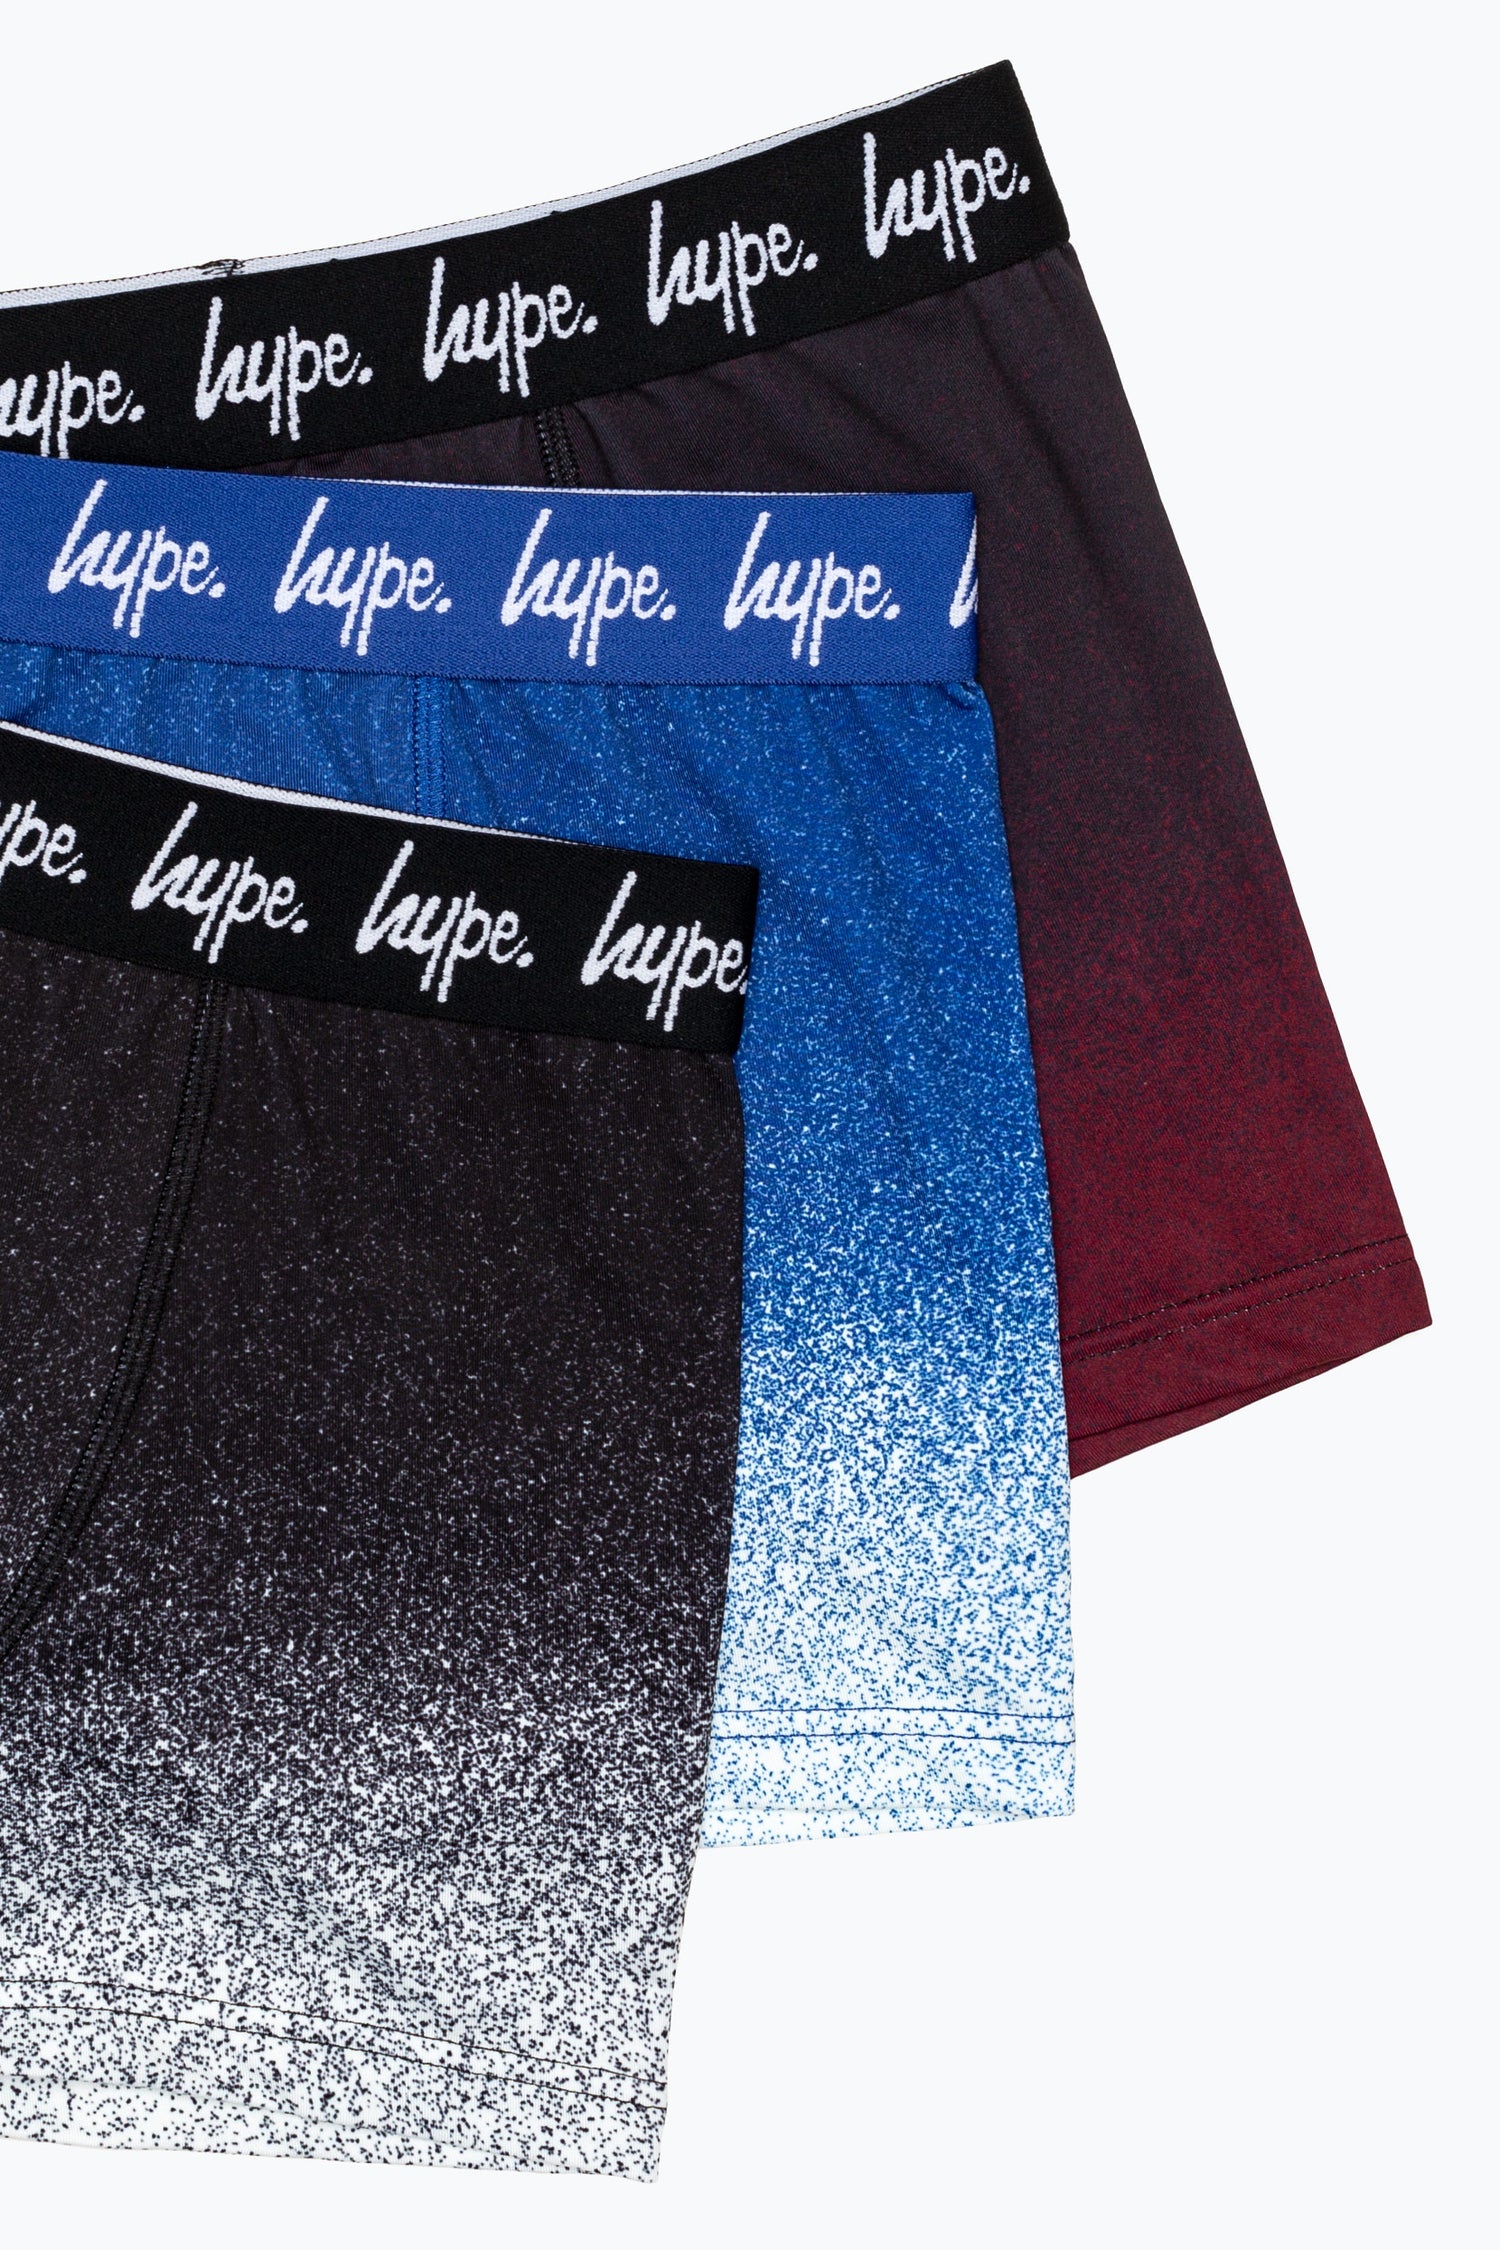 HYPE FADED SPECKLE MENS BOXER SHORTS X3 PACK